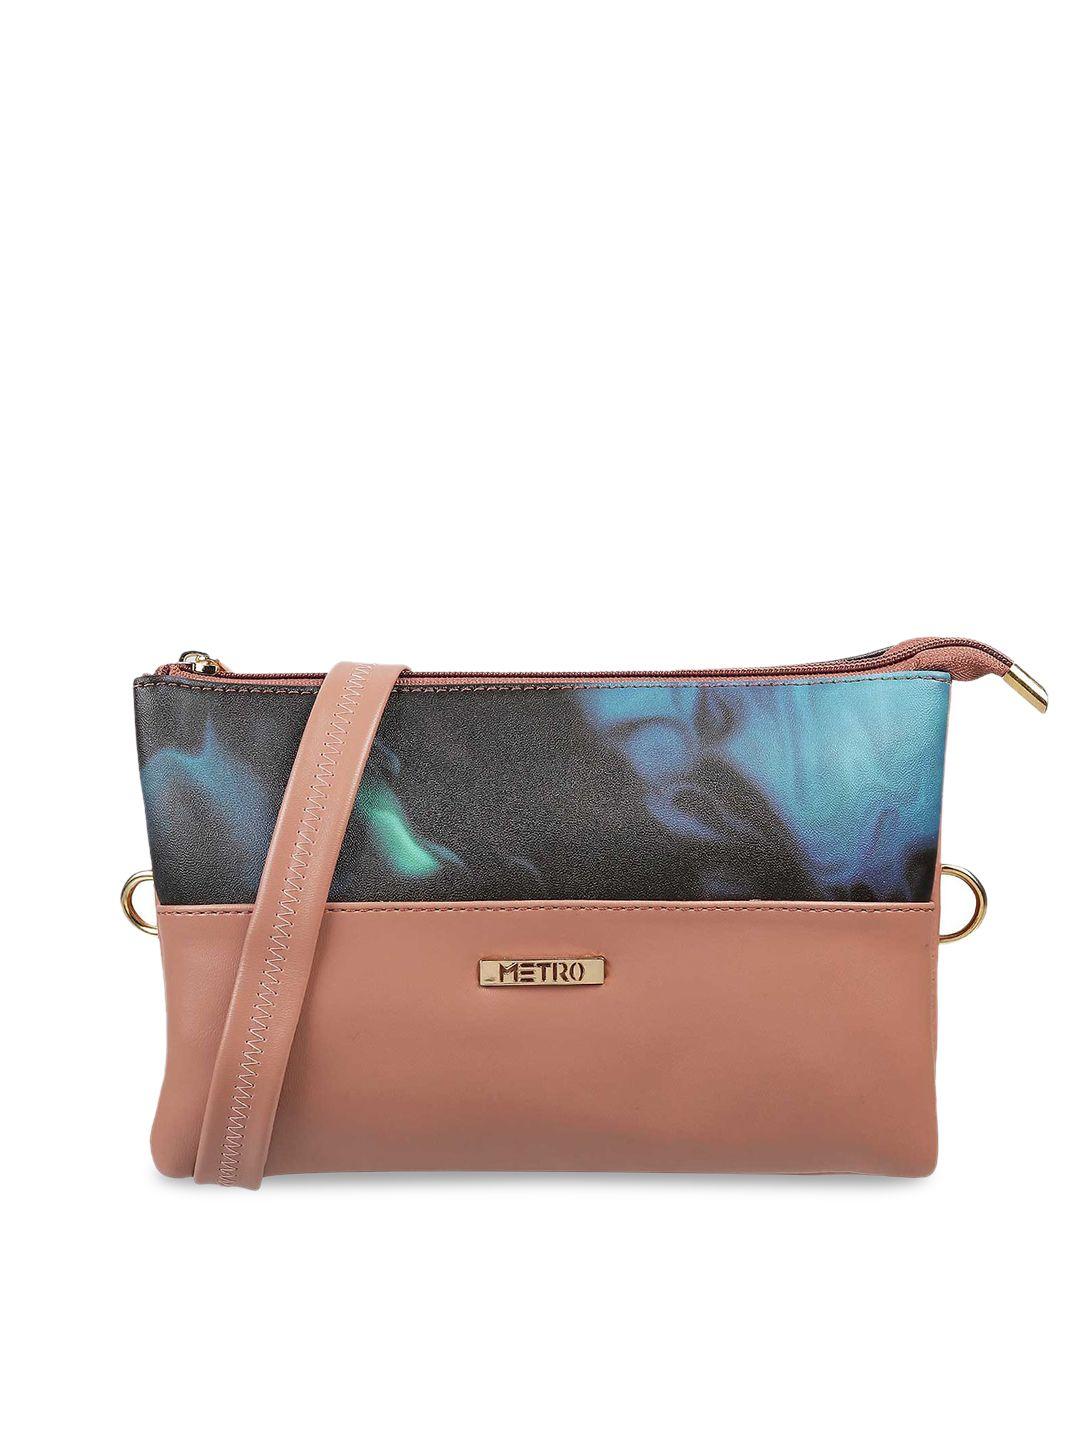 metro peach-coloured colourblocked swagger shoulder bag with tasselled